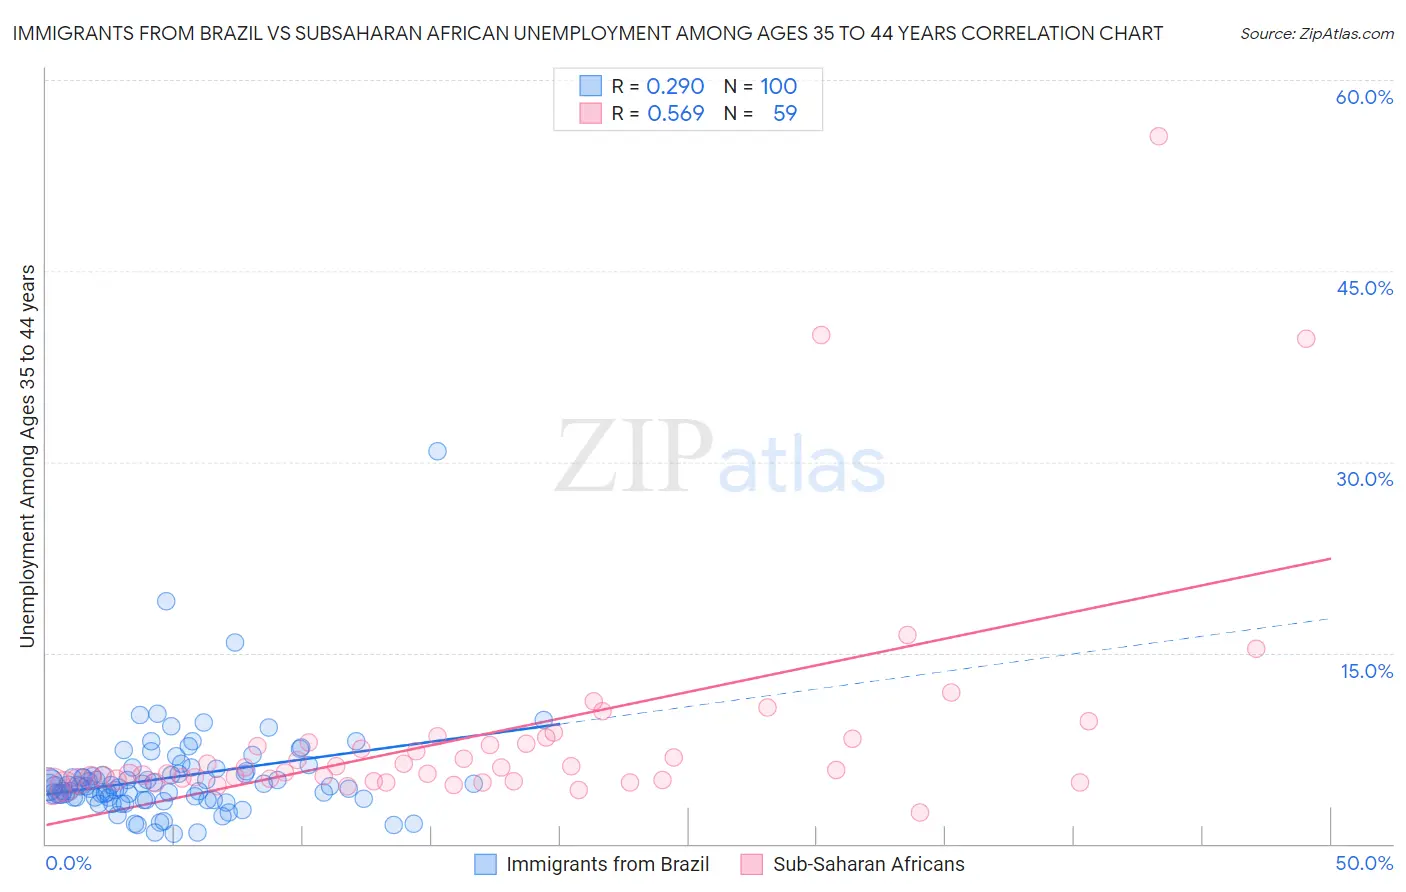 Immigrants from Brazil vs Subsaharan African Unemployment Among Ages 35 to 44 years